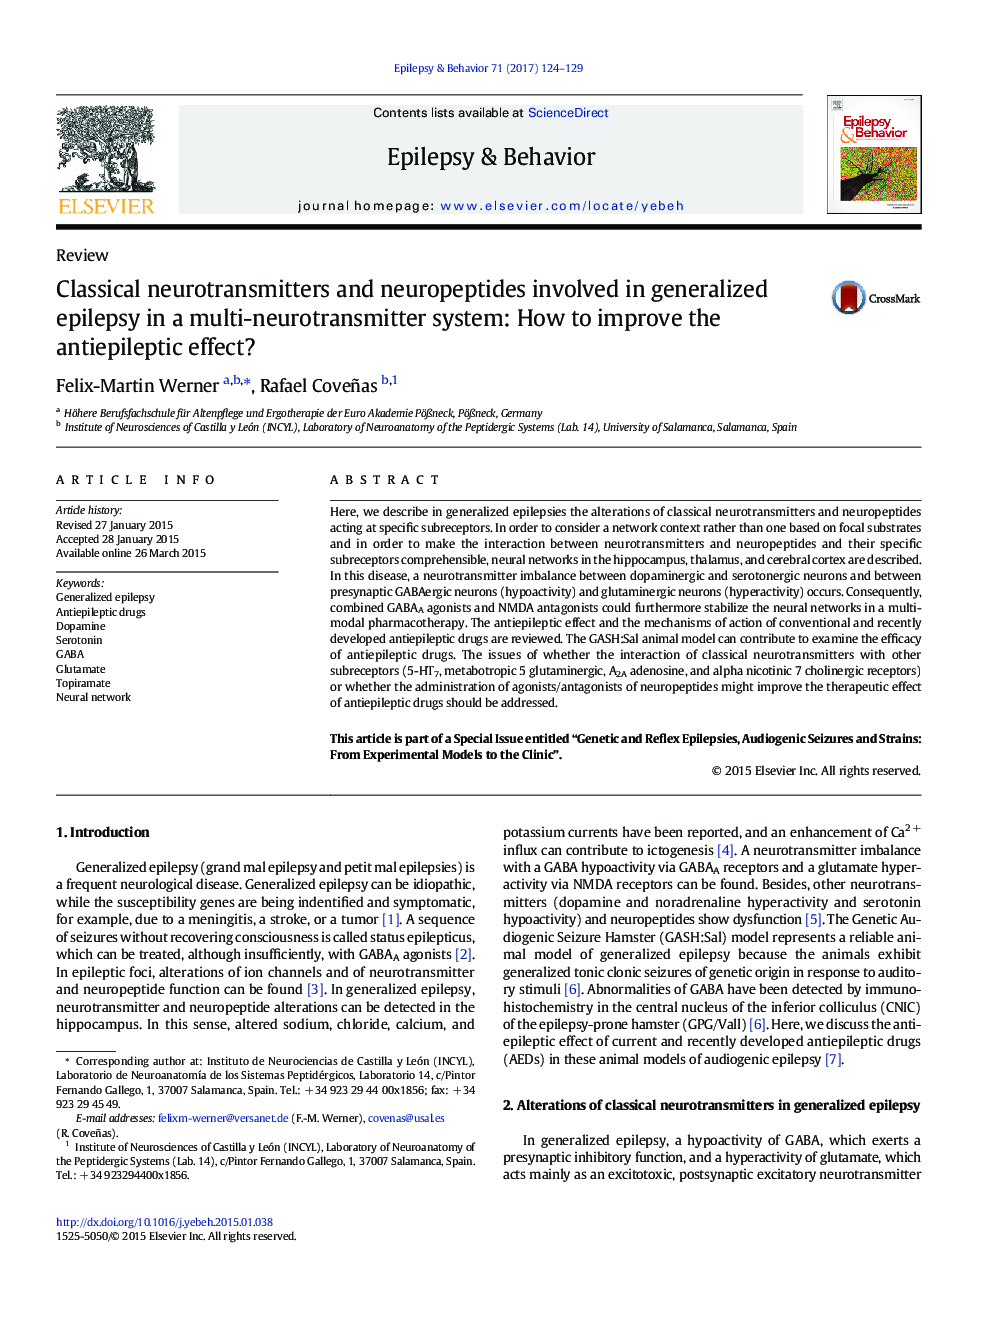 Classical neurotransmitters and neuropeptides involved in generalized epilepsy in a multi-neurotransmitter system: How to improve the antiepileptic effect?